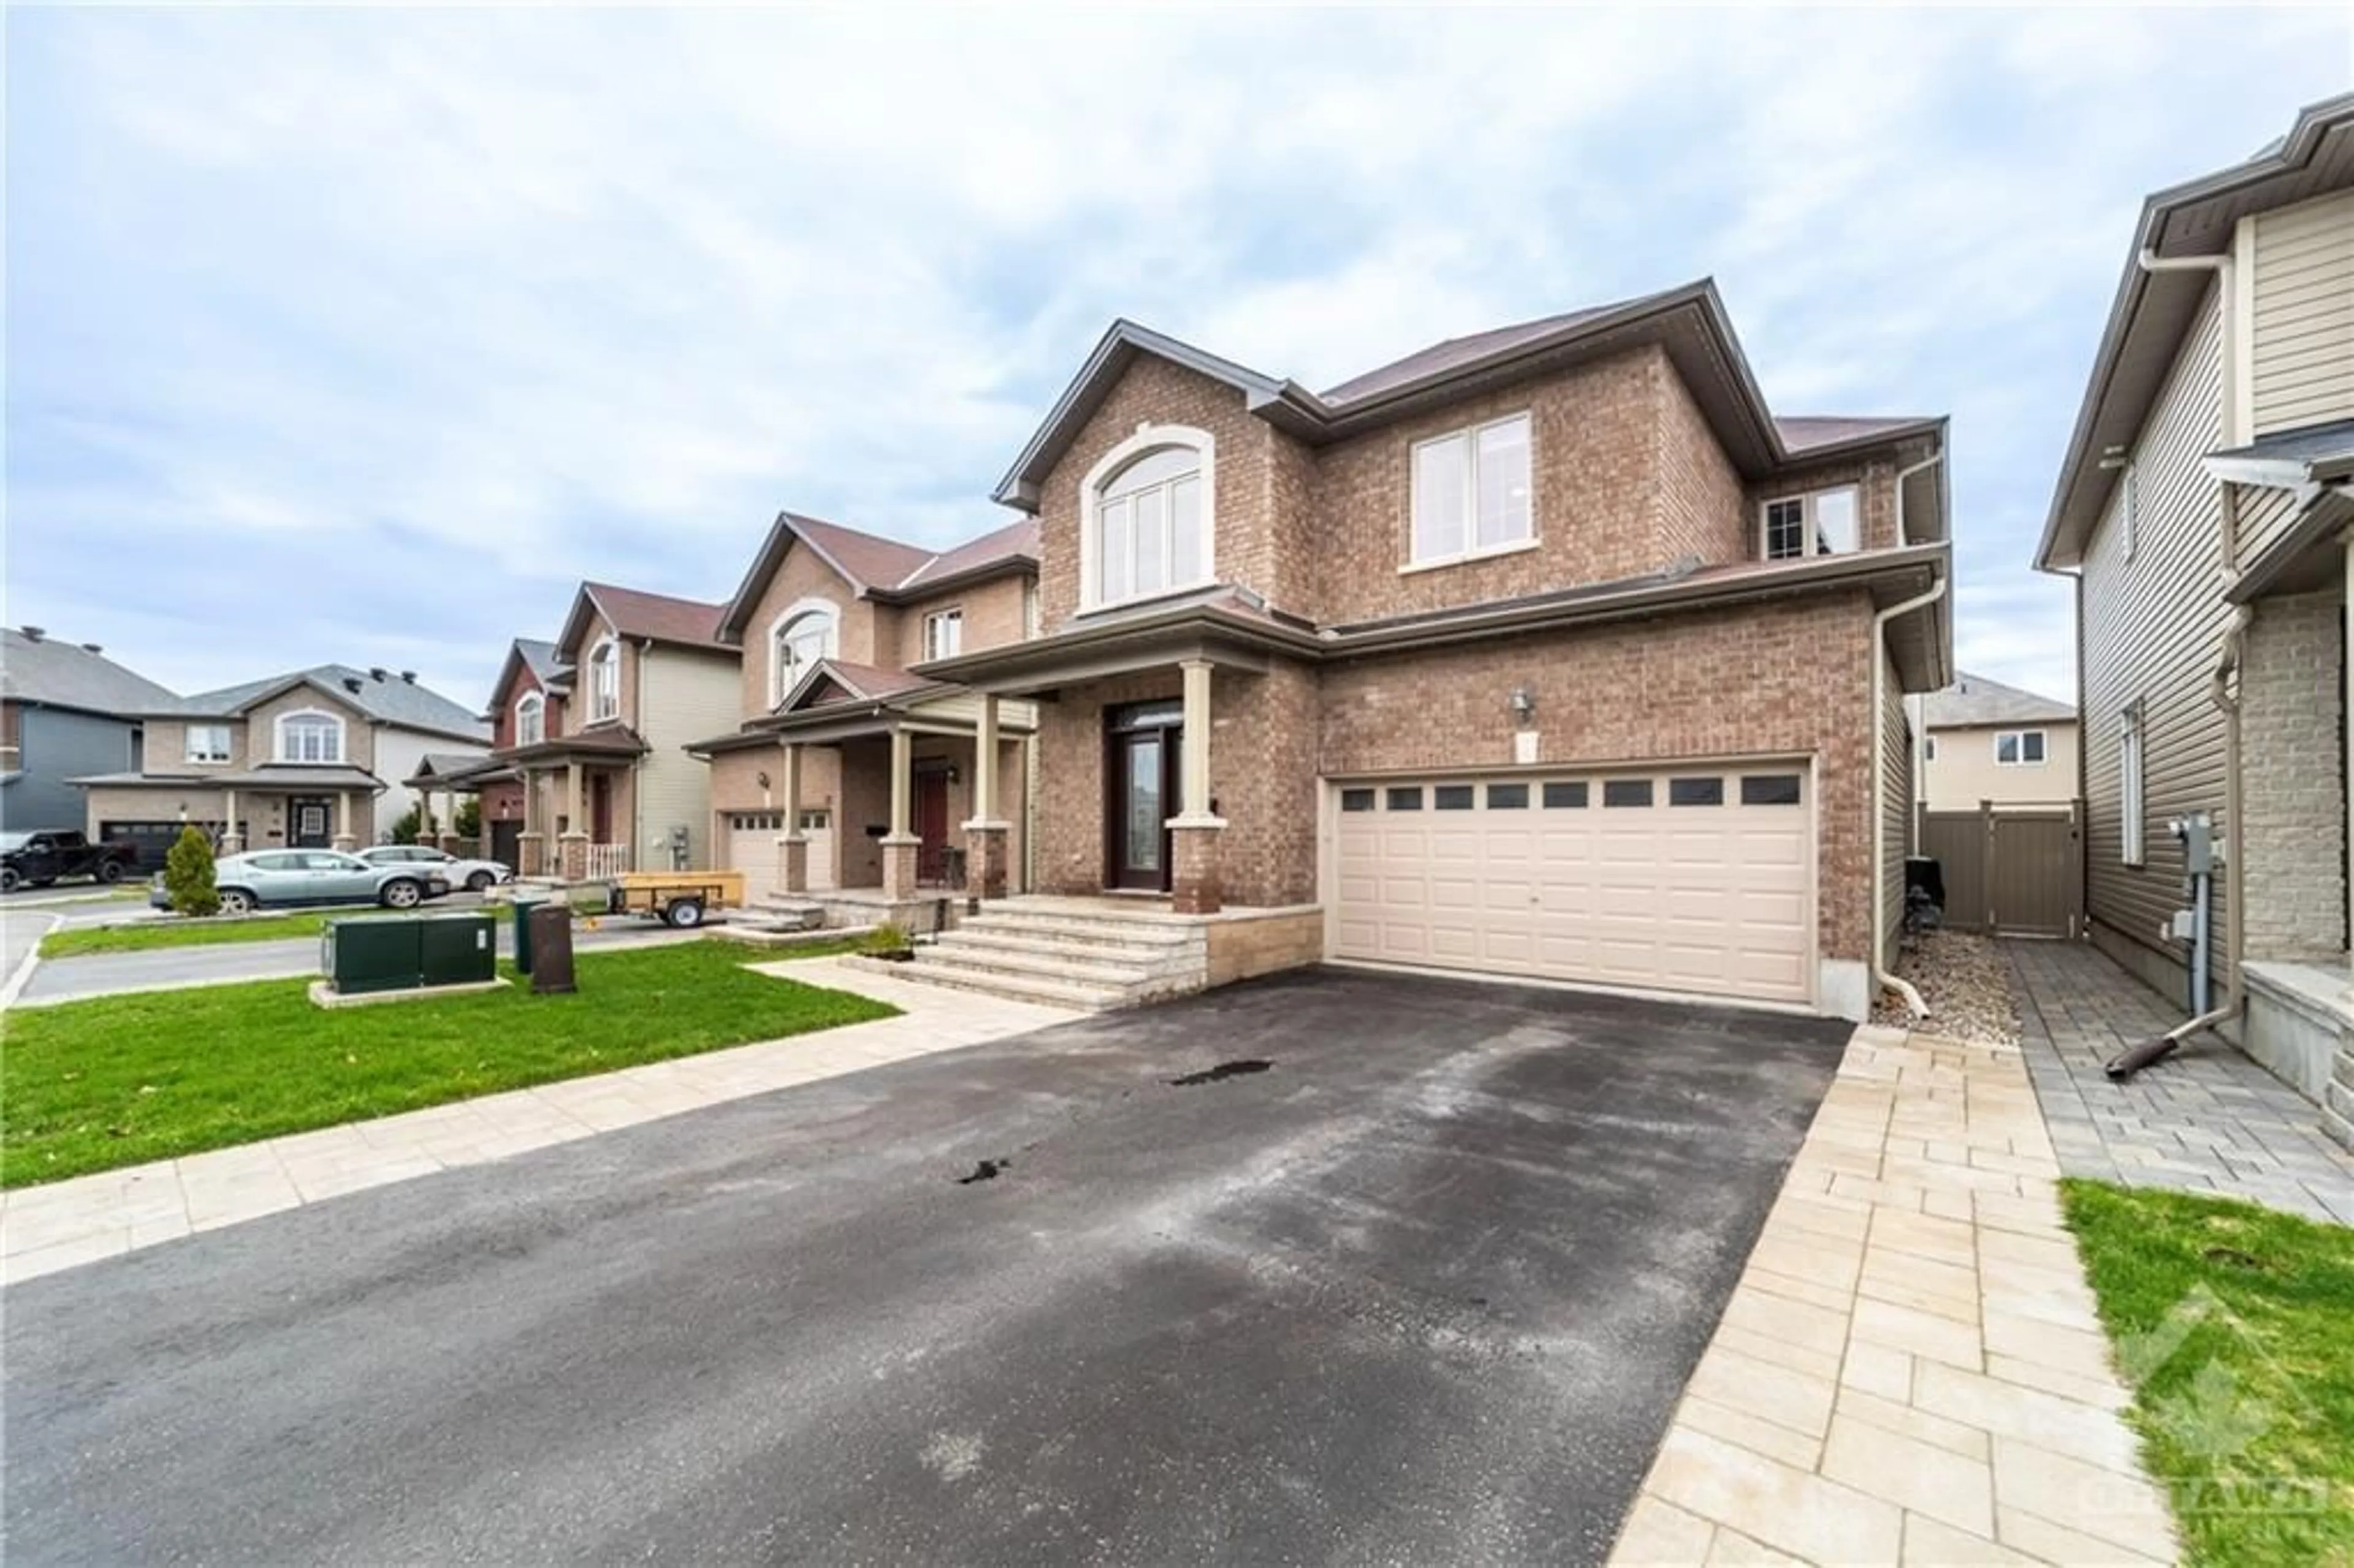 Frontside or backside of a home for 23 HIBISCUS Way, Ottawa Ontario K2J 6A6